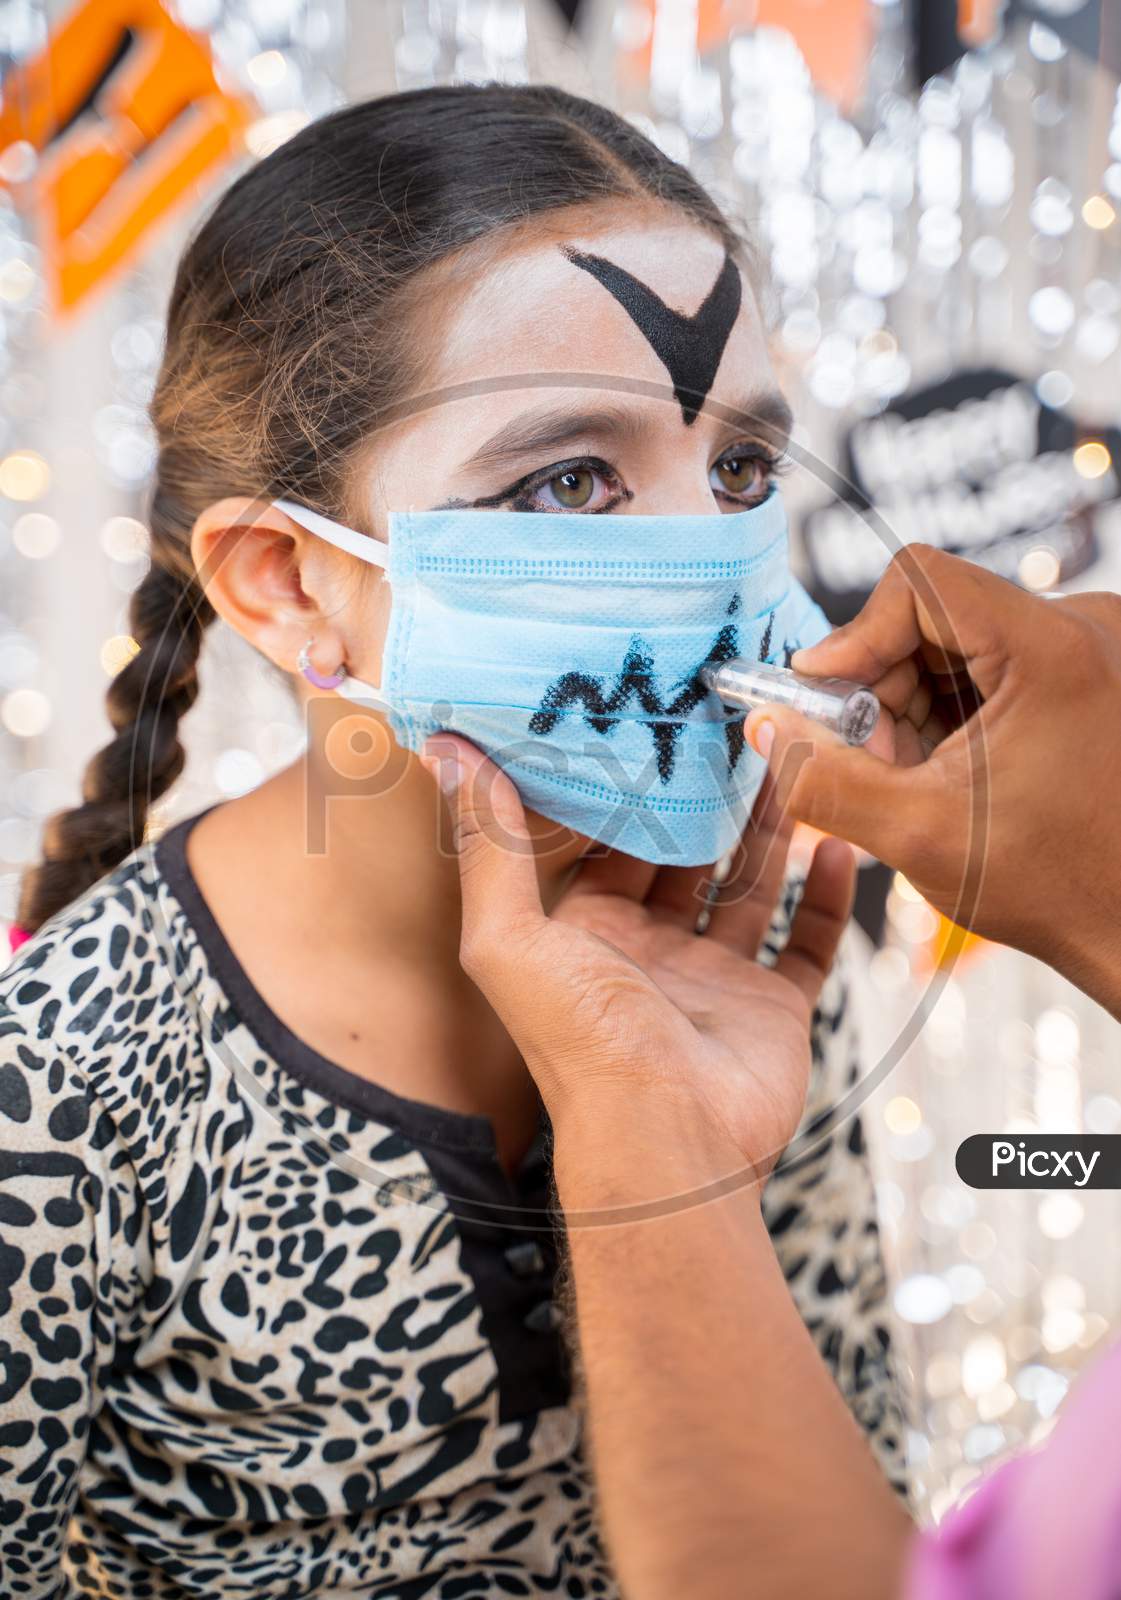 Kid Getting Ready Or Preparing For Halloween By Painting On Medical Face Mask - Concept Of Holiday, Halloween, And Childhood Festival Celebration And Preparation.